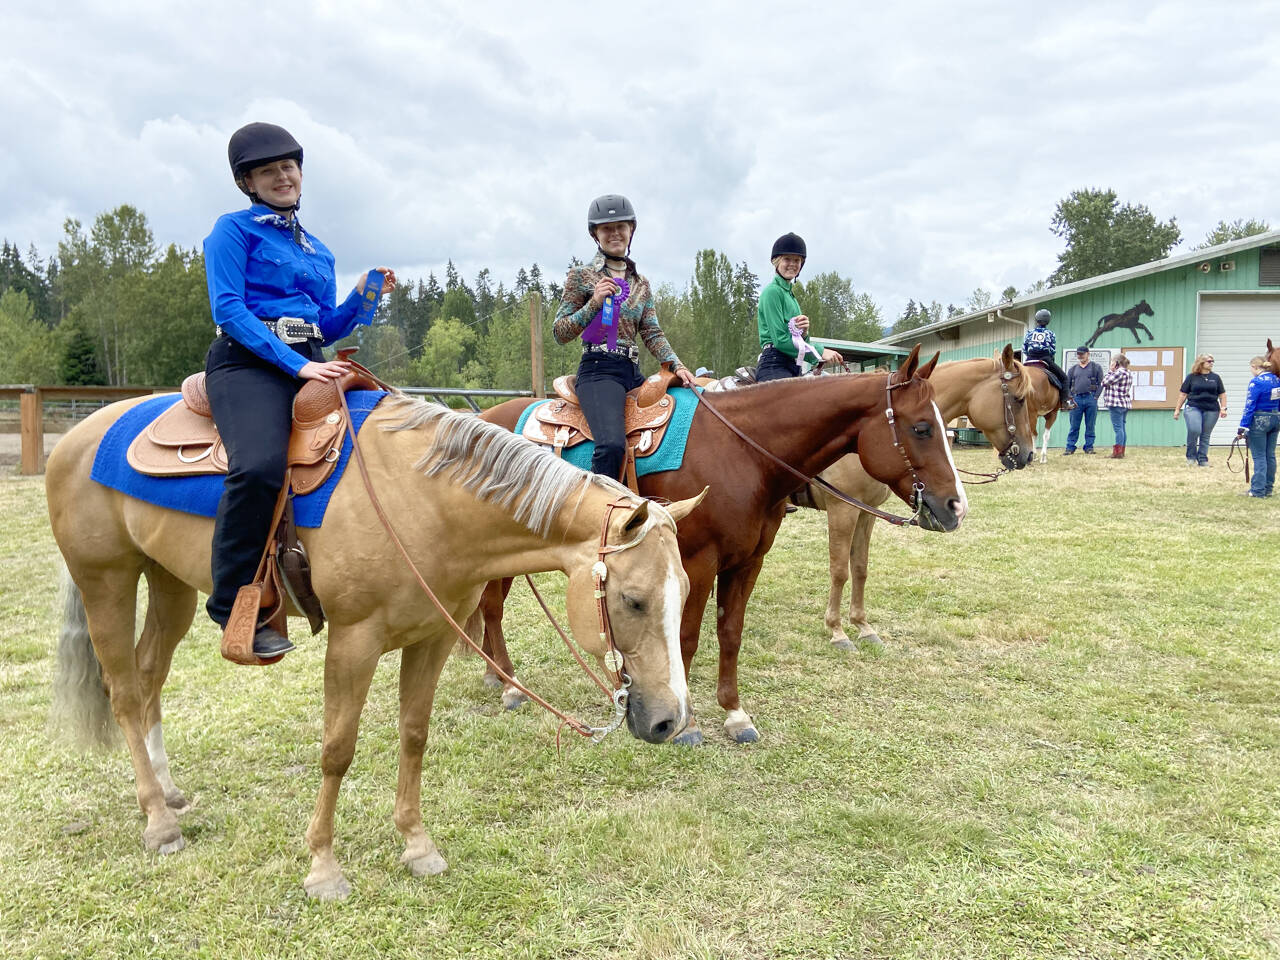 Submitted photo
From left, Ruby Coulson on Sandy, Taylor Maughan on Ru, and Celbie Karjalainen on Citrene, compete at the Neon Riders/Silver Spurs 4H Horse Show and Pre-Fair event in mid-July.